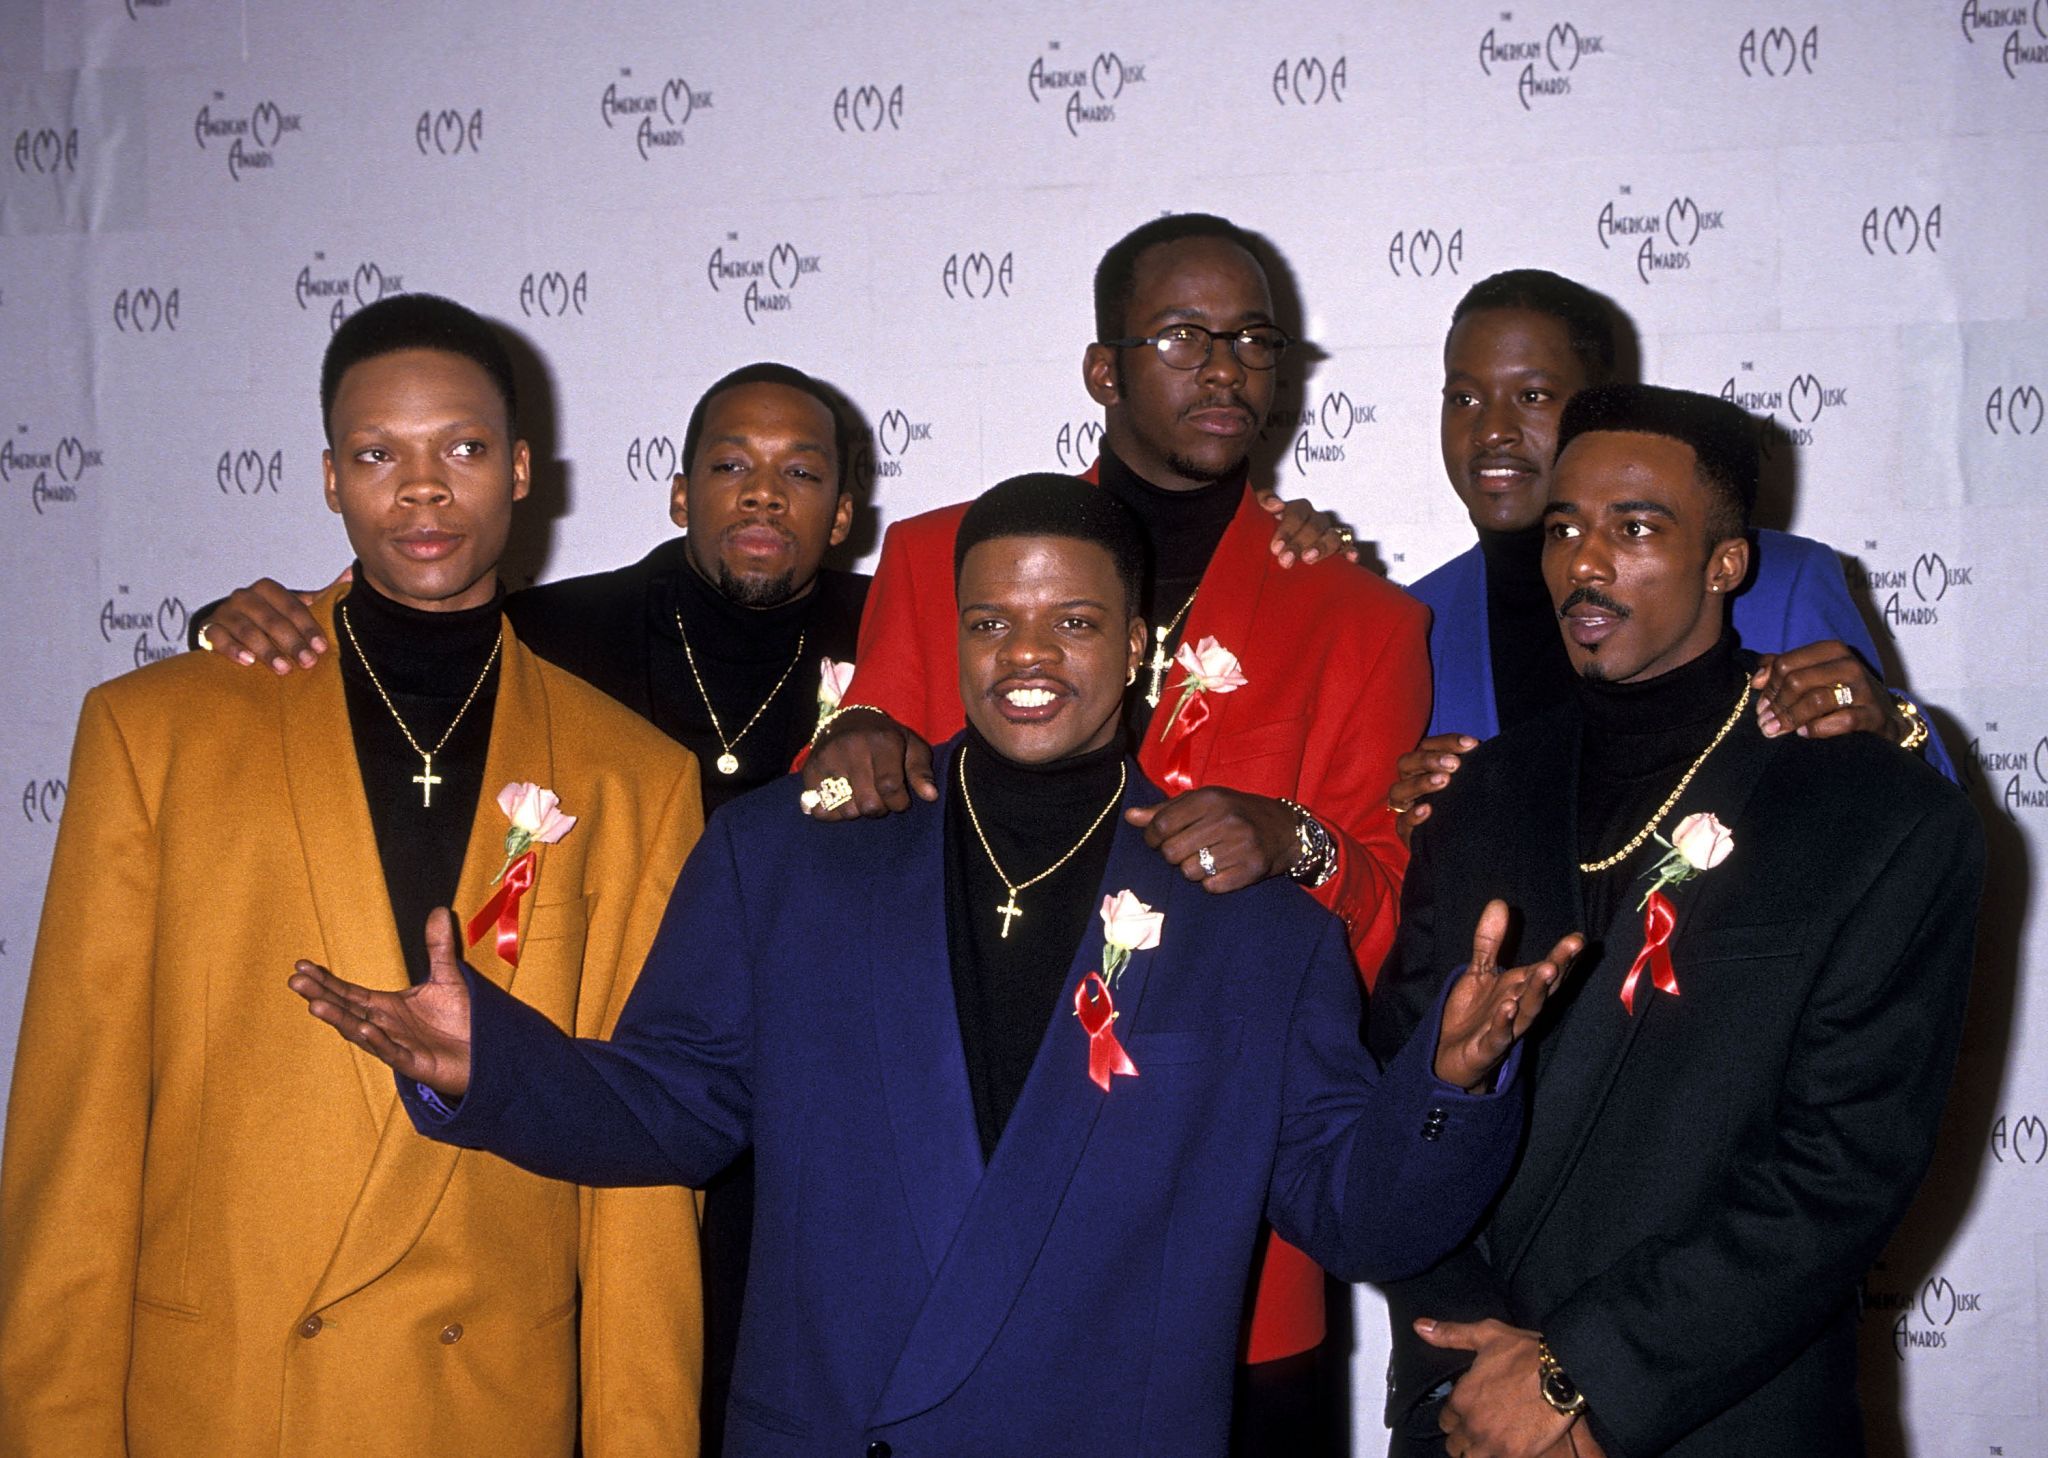 Who is the richest from New Edition?